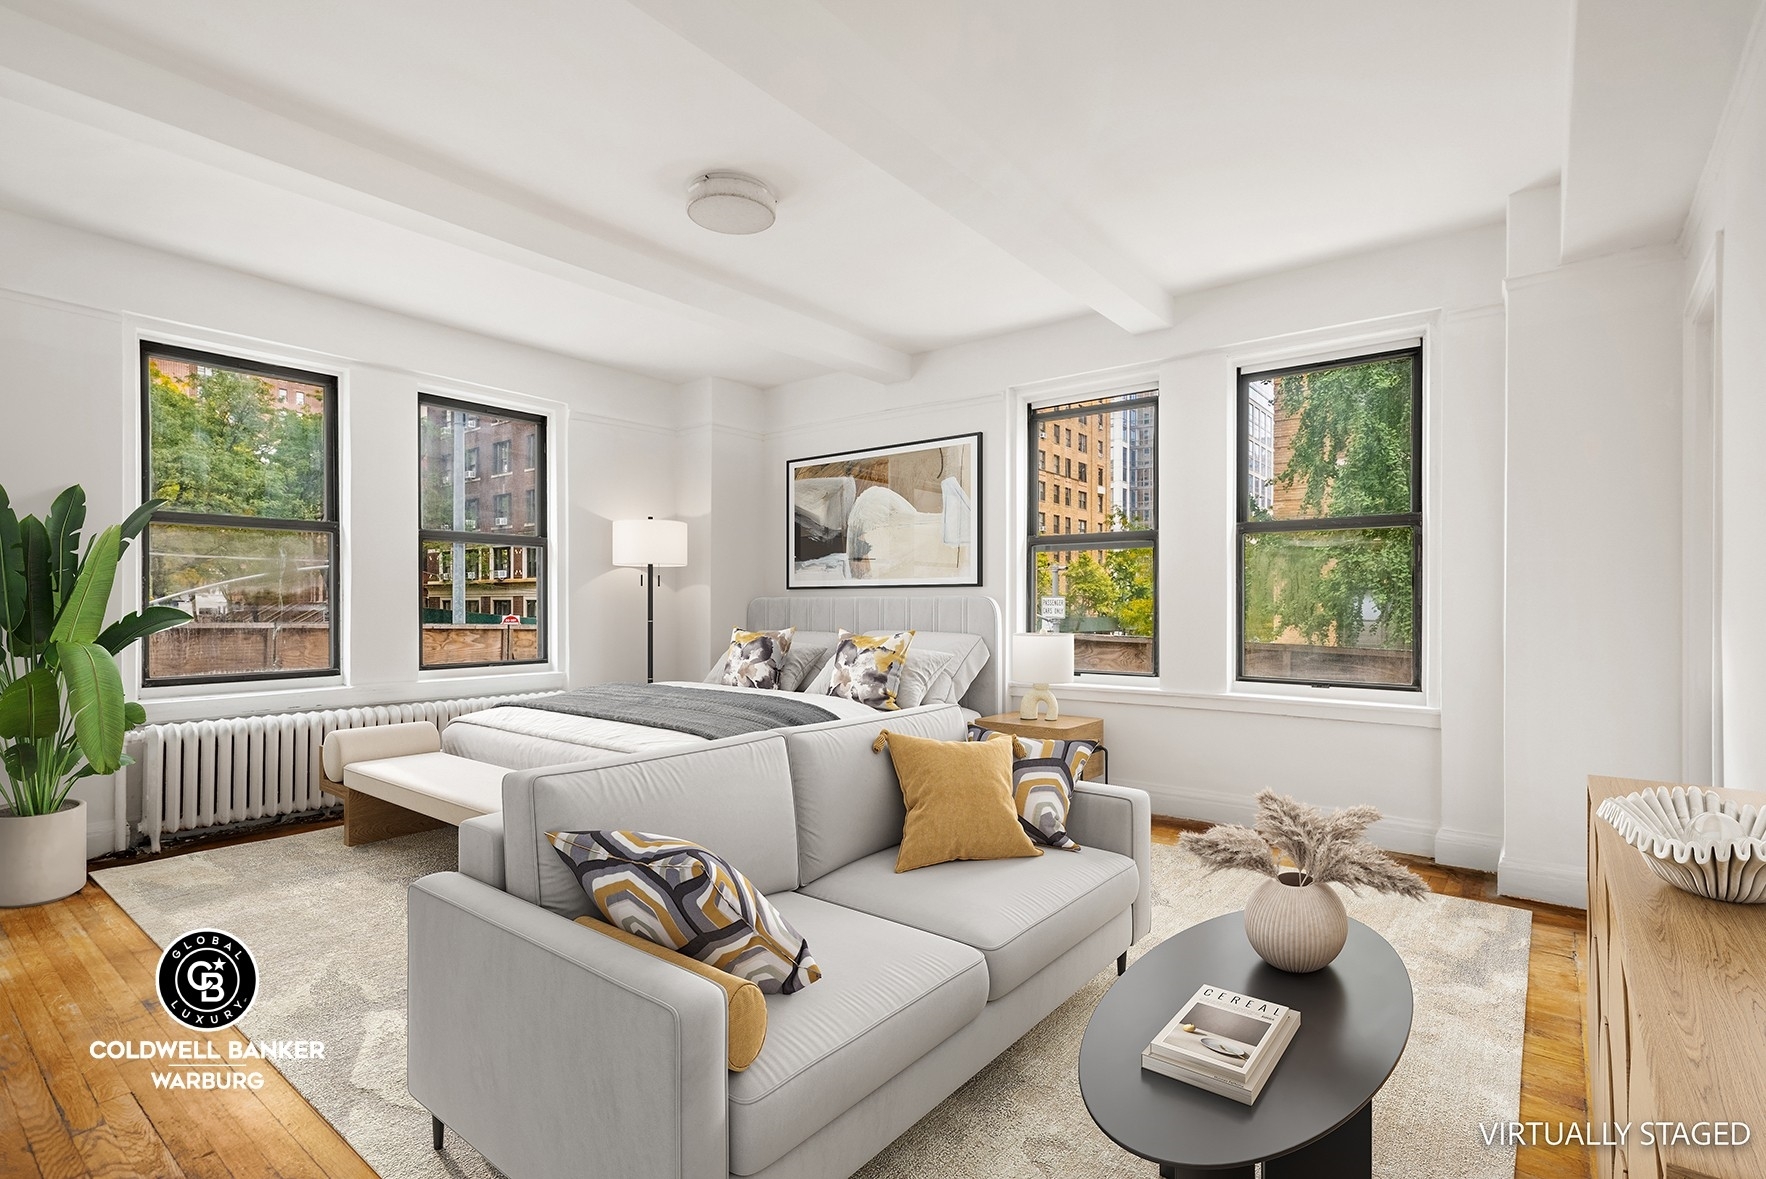 Property for Sale at Lincoln Square, New York, New York 10023